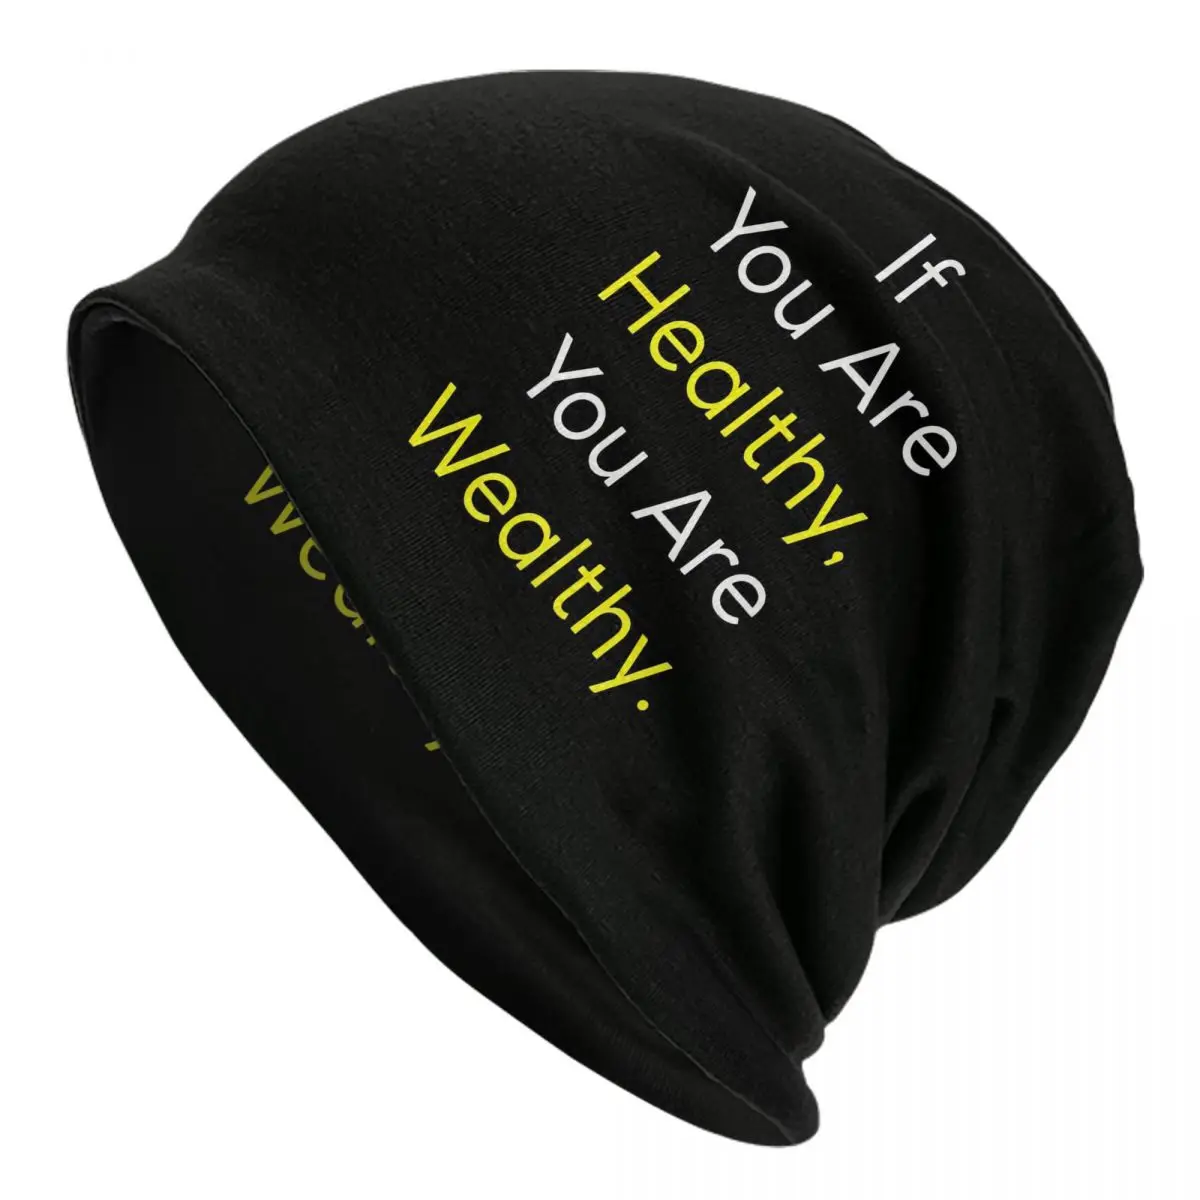 

Bonnet Hats Indian God Goddess Of Love Men Women's If You Are Healthy You Are Wealthy Cap Hip Hop Skullies Beanies Caps